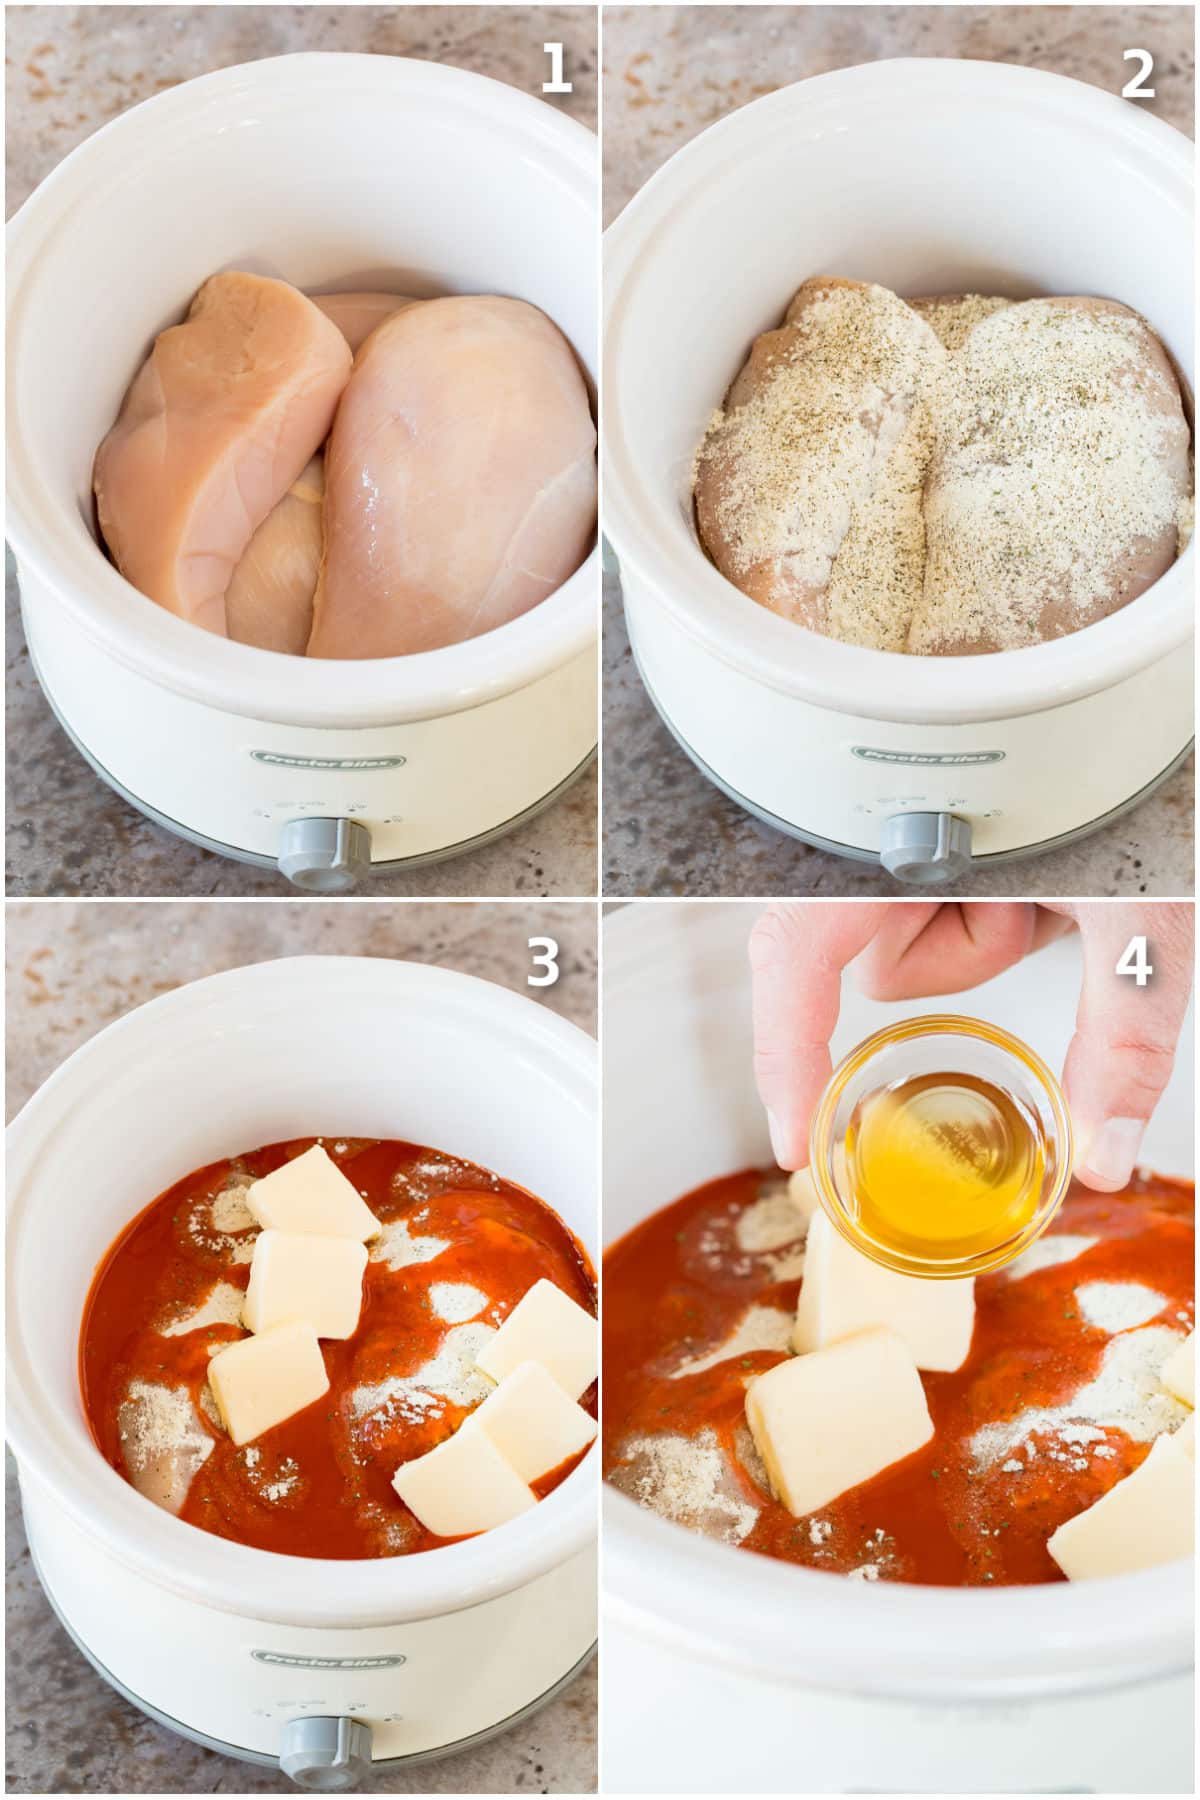 Step by step photos showing how to make crock pot buffalo chicken.